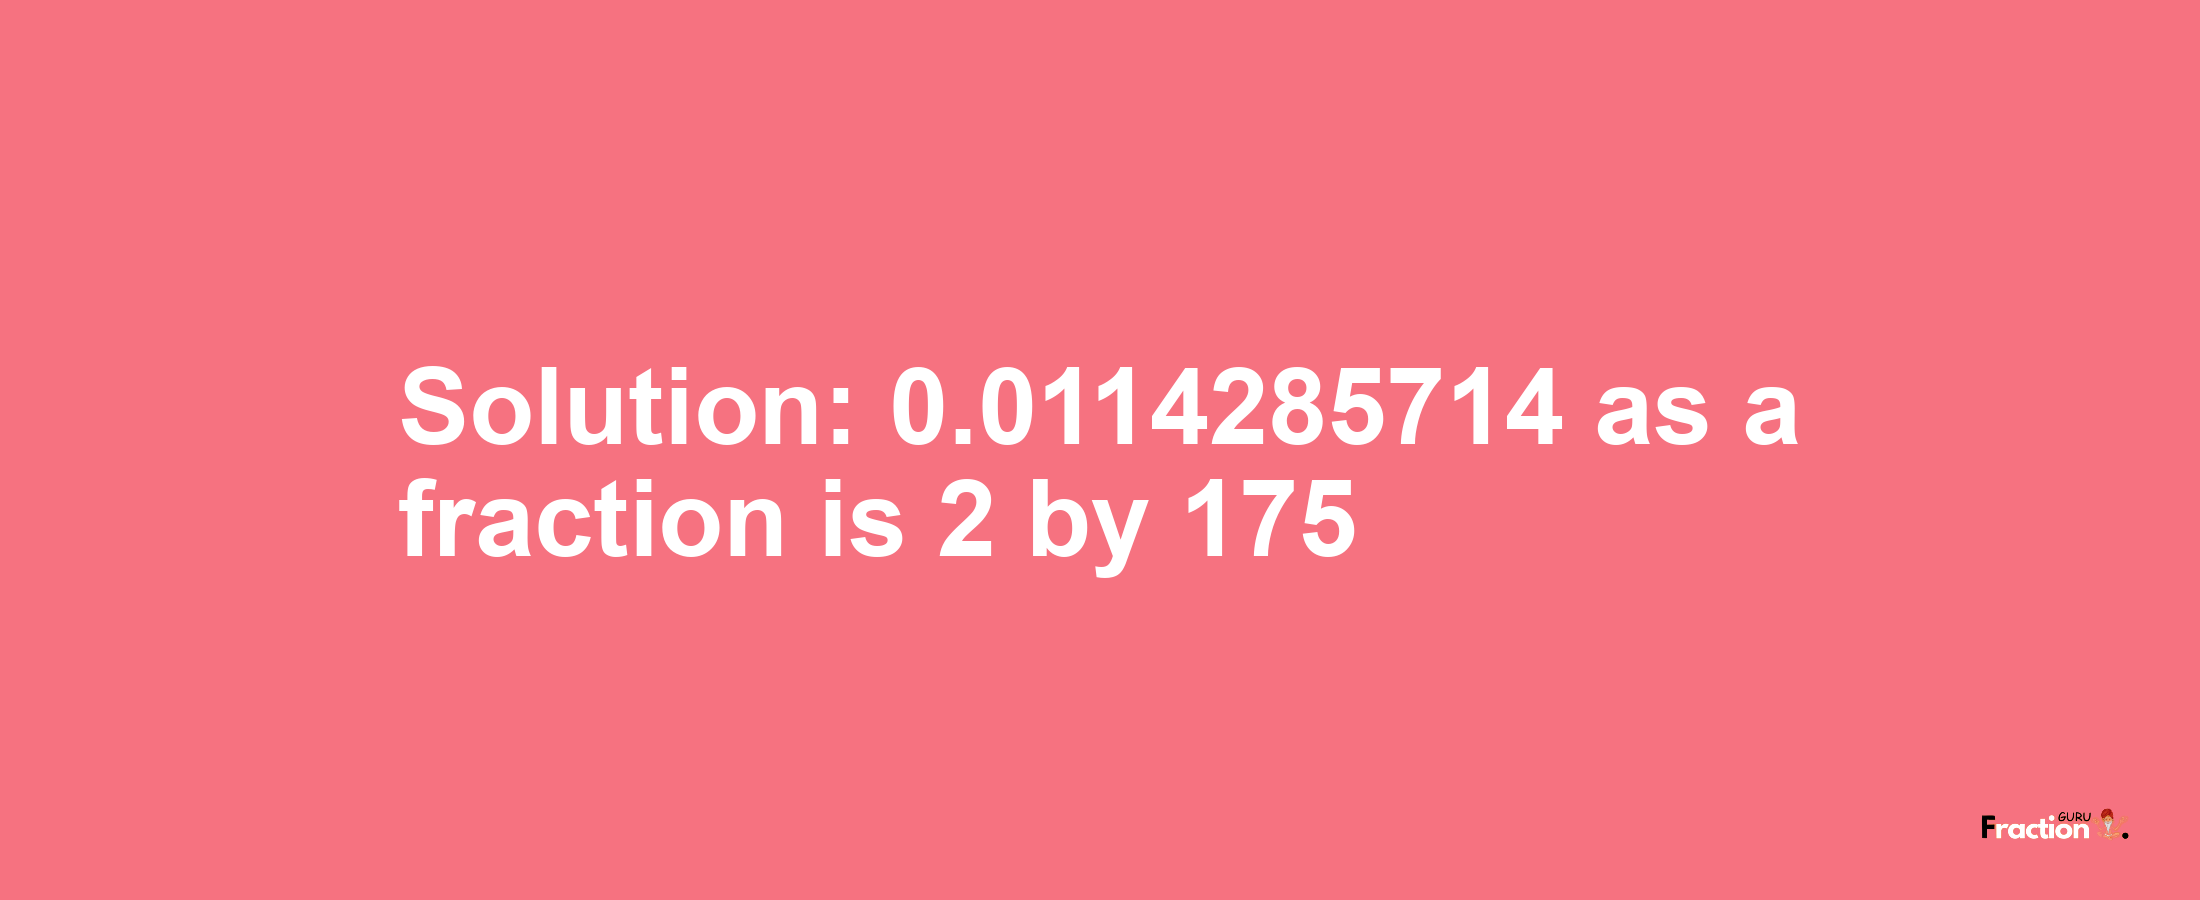 Solution:0.0114285714 as a fraction is 2/175